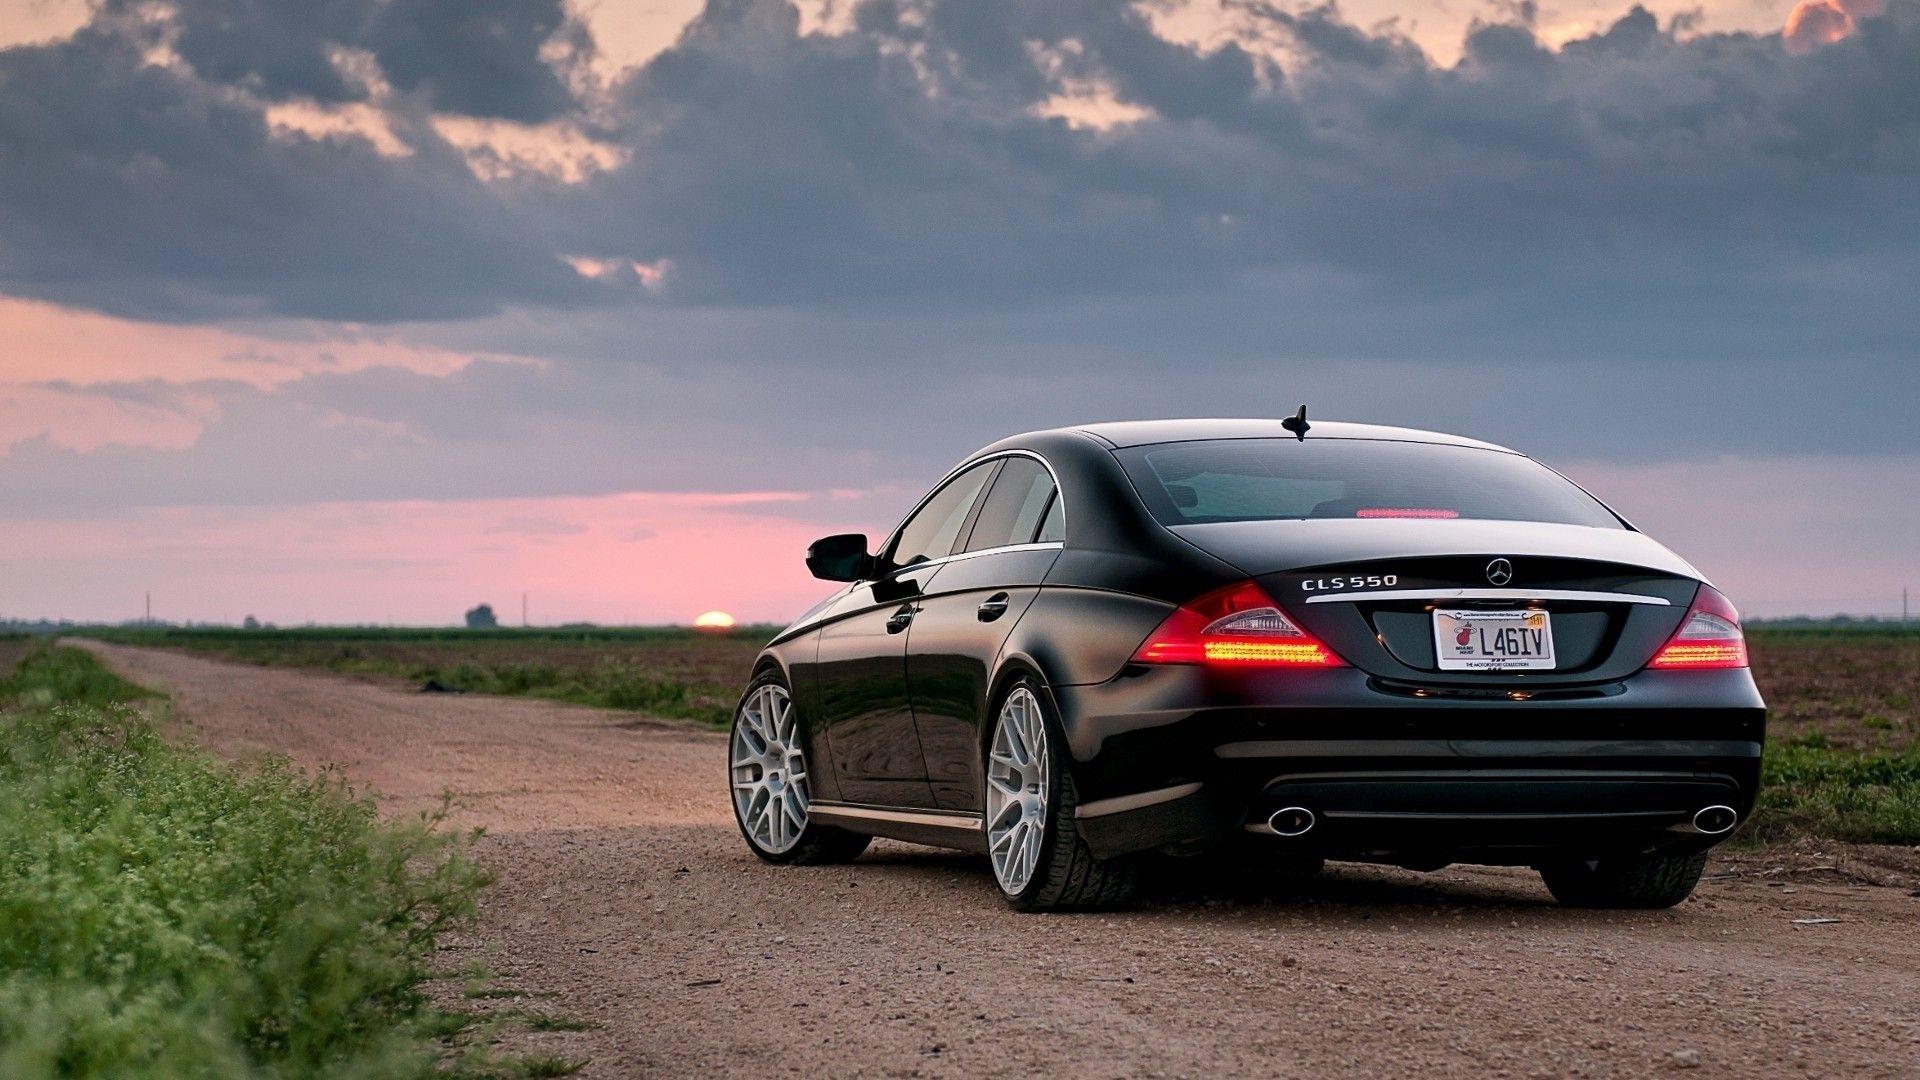 Mercedes CLS 550 cars wallpaper / Wallbase.cc. MBforever